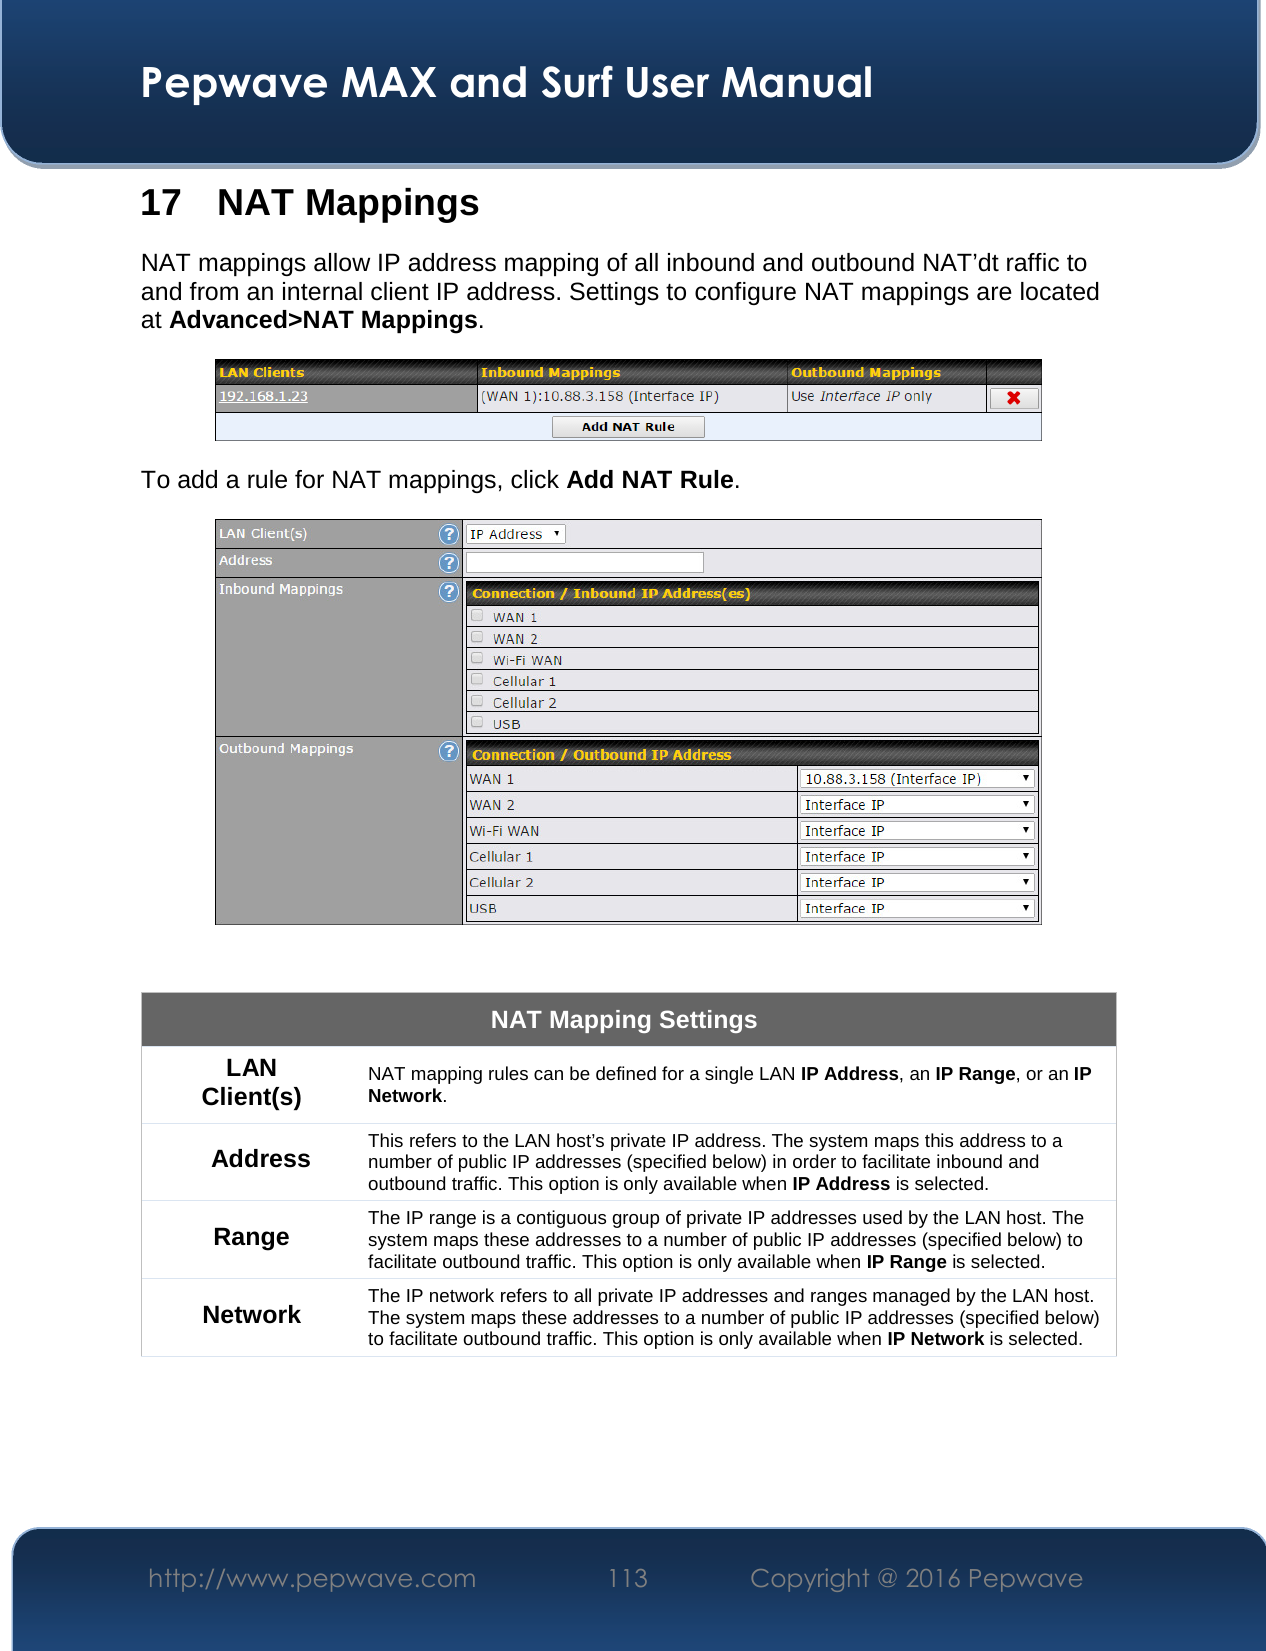  Pepwave MAX and Surf User Manual http://www.pepwave.com  113    Copyright @ 2016 Pepwave   17 NAT Mappings NAT mappings allow IP address mapping of all inbound and outbound NAT’dt raffic to and from an internal client IP address. Settings to configure NAT mappings are located at Advanced&gt;NAT Mappings.  To add a rule for NAT mappings, click Add NAT Rule.   NAT Mapping Settings LAN Client(s) NAT mapping rules can be defined for a single LAN IP Address, an IP Range, or an IP Network. Address This refers to the LAN host’s private IP address. The system maps this address to a number of public IP addresses (specified below) in order to facilitate inbound and outbound traffic. This option is only available when IP Address is selected. Range The IP range is a contiguous group of private IP addresses used by the LAN host. The system maps these addresses to a number of public IP addresses (specified below) to facilitate outbound traffic. This option is only available when IP Range is selected. Network The IP network refers to all private IP addresses and ranges managed by the LAN host. The system maps these addresses to a number of public IP addresses (specified below) to facilitate outbound traffic. This option is only available when IP Network is selected. 